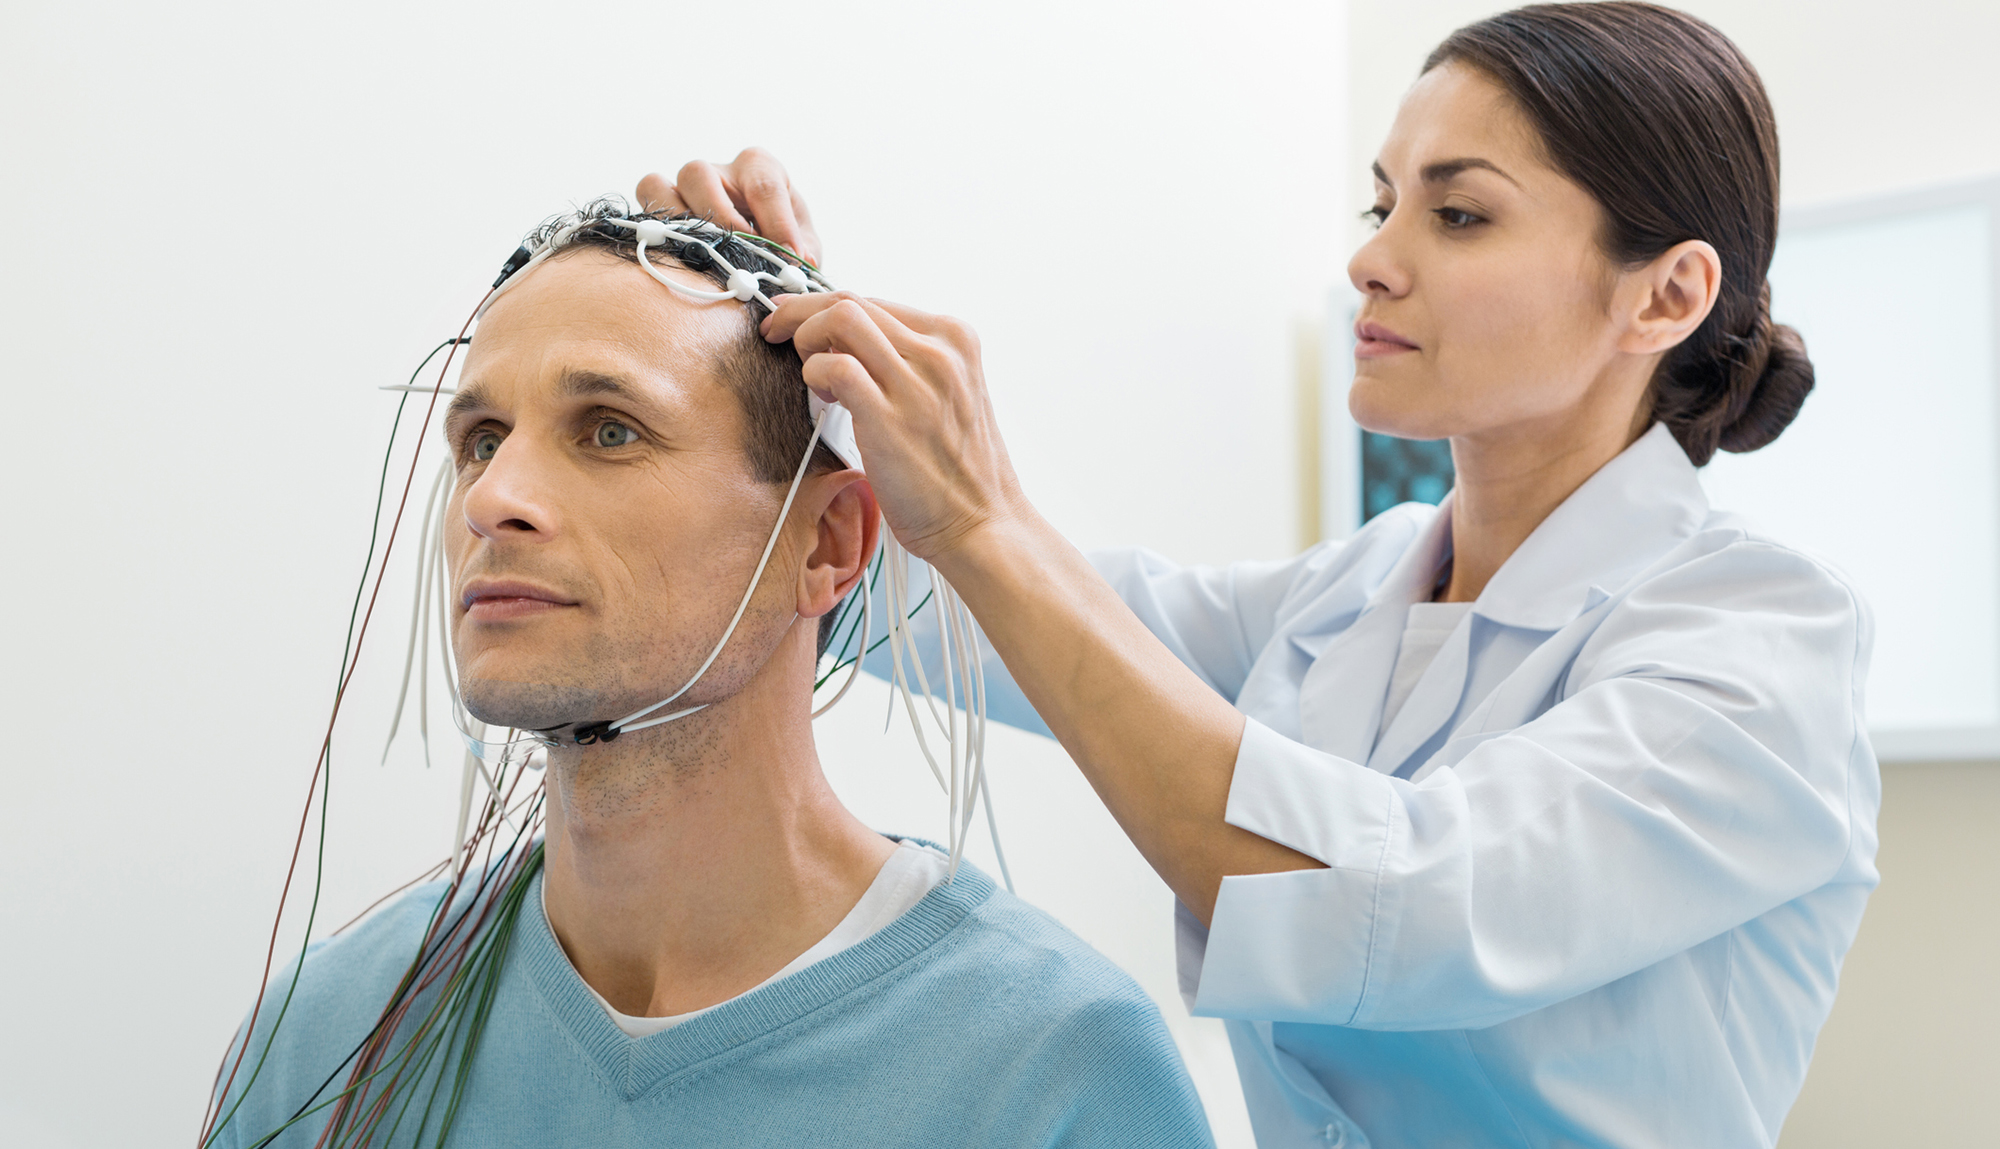 A doctor prepares a patient for an EEG test.